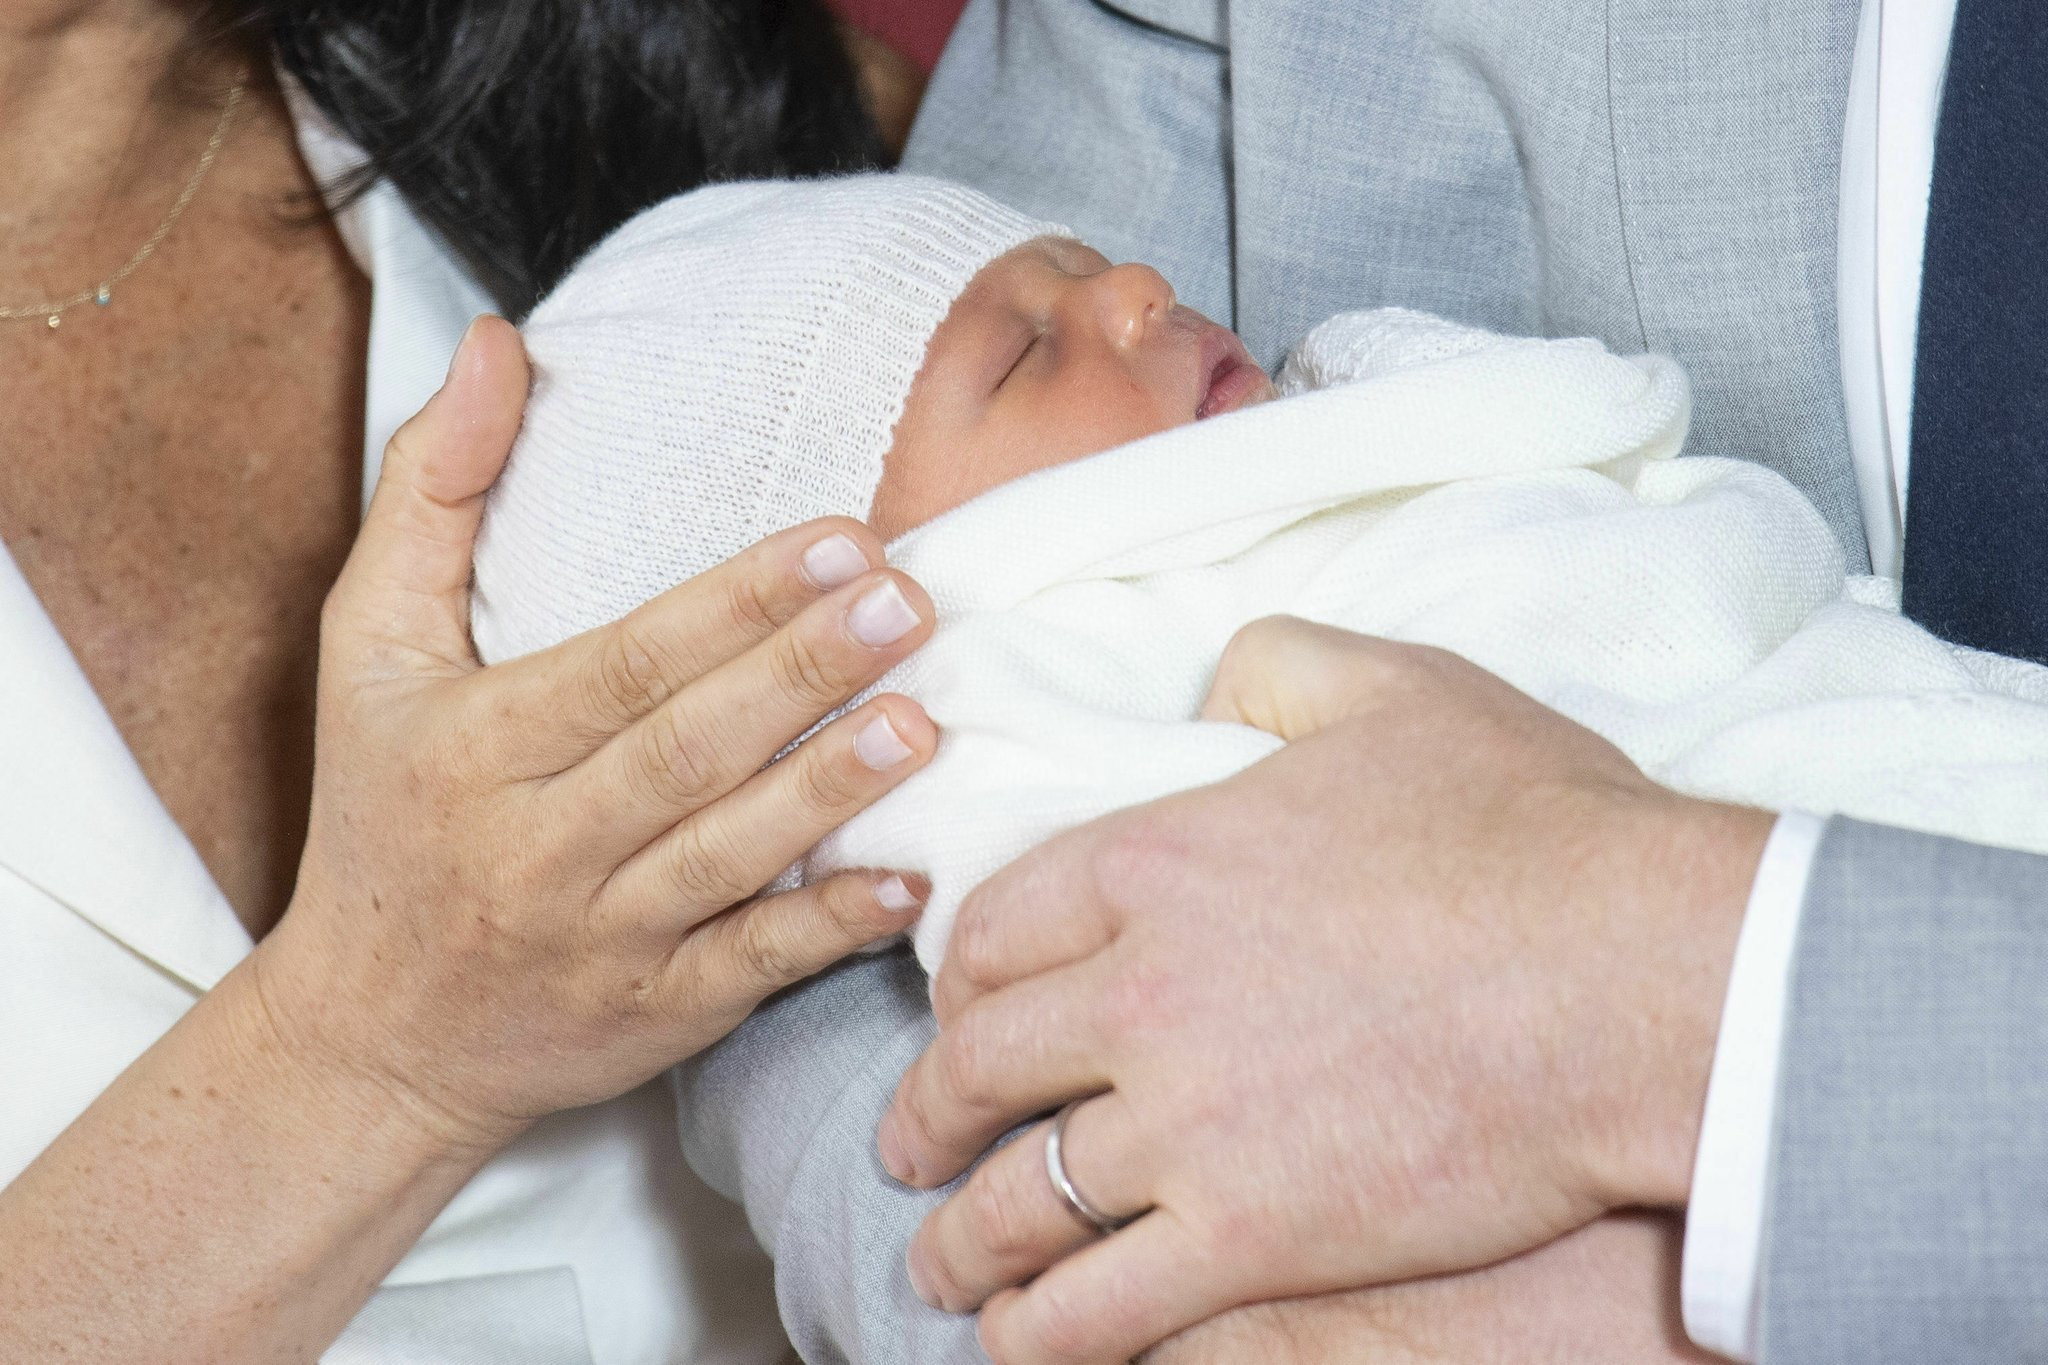 First Photos Prince Harry And Meghan Markle’s Baby Boy (2)